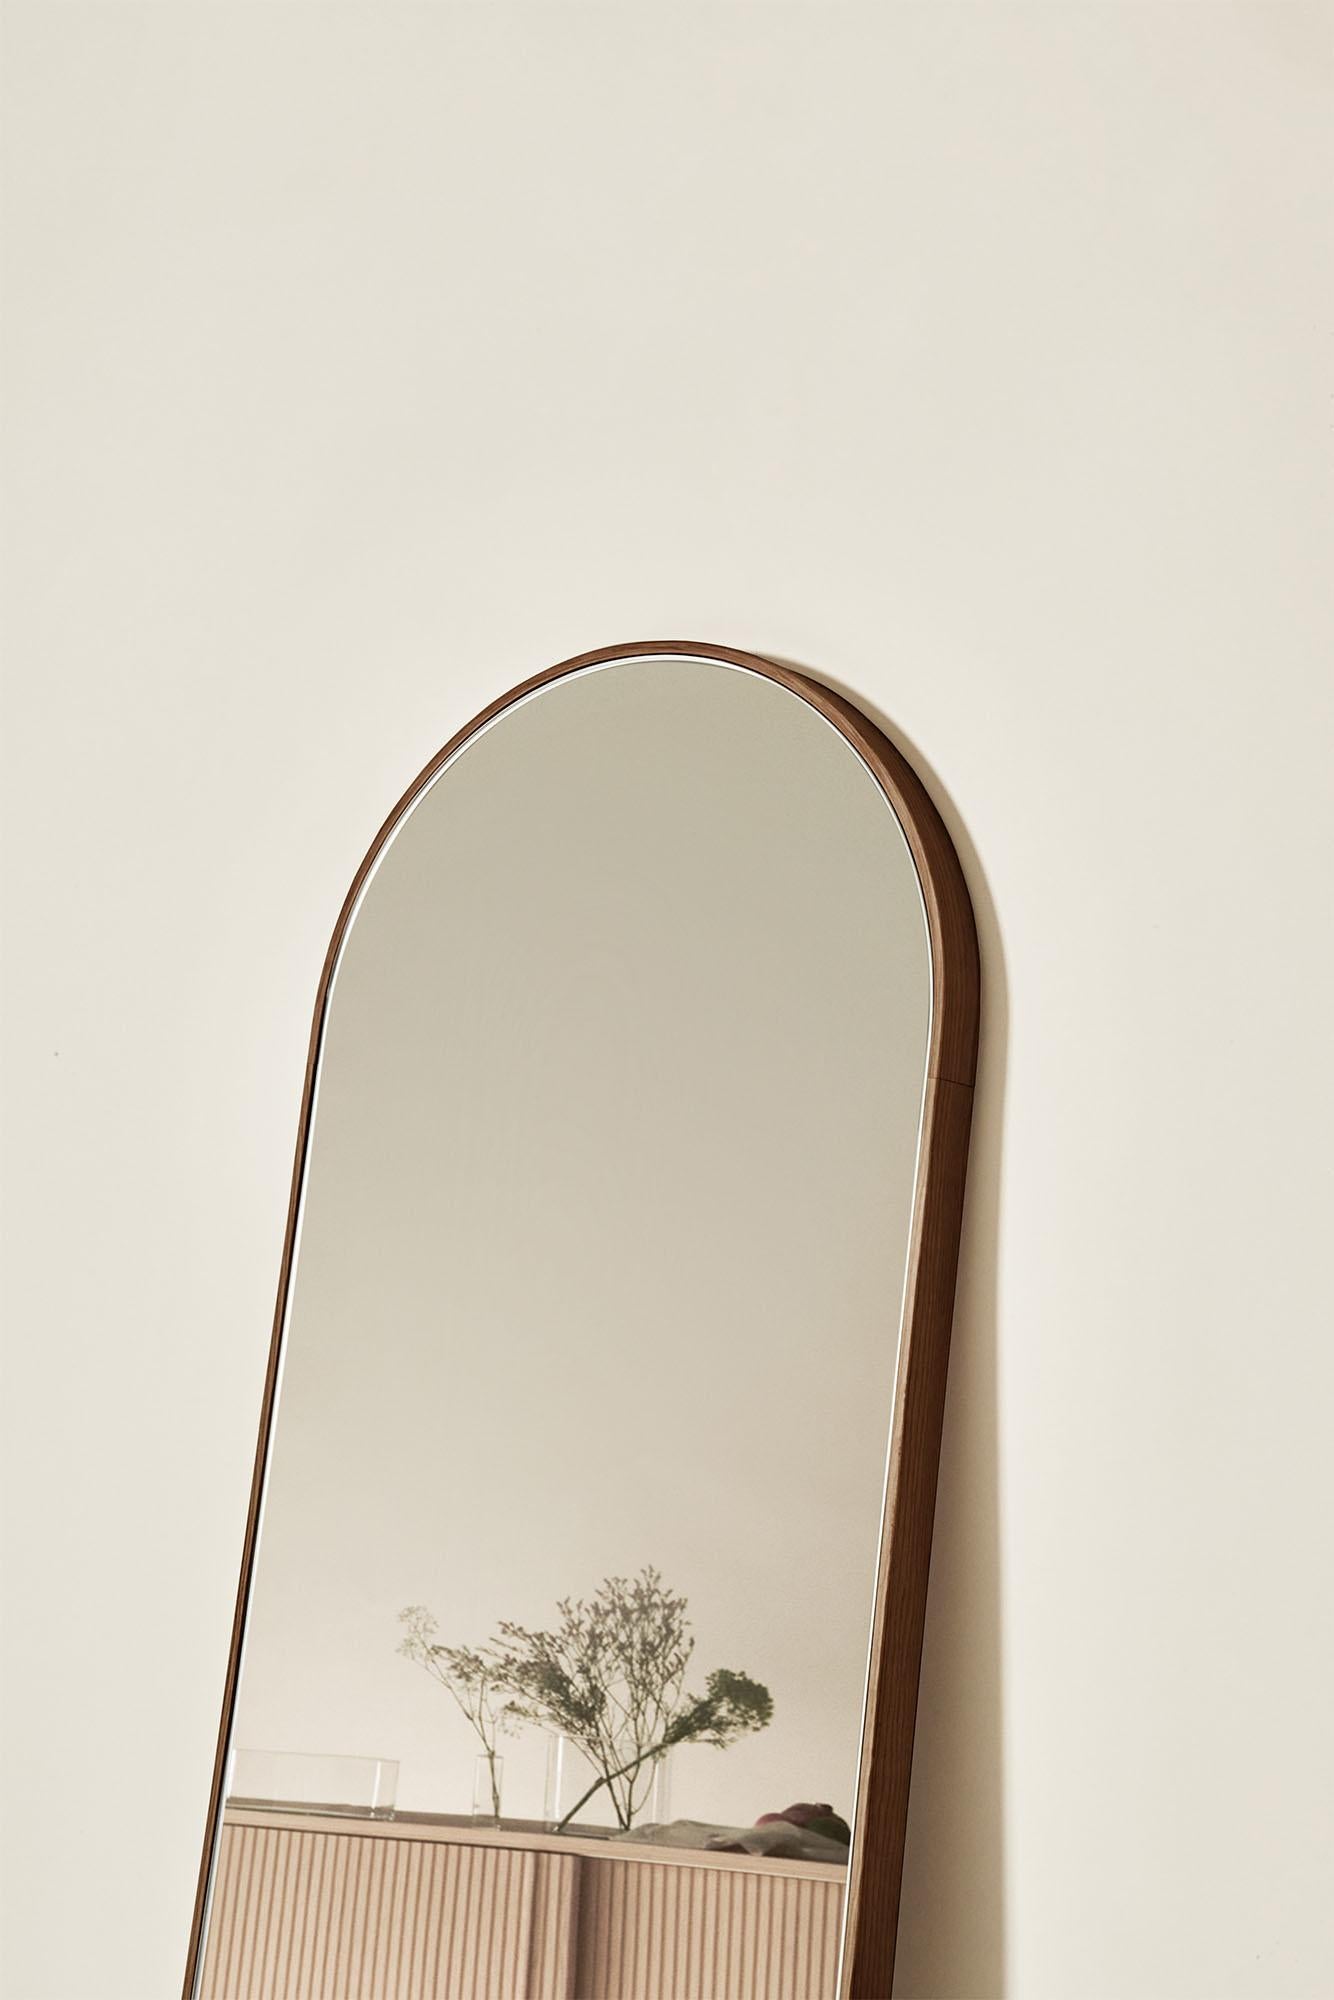 Modern Tutto Sesto Solid Wood Oval Mirror, Ash in Brown Finish, Contemporary For Sale